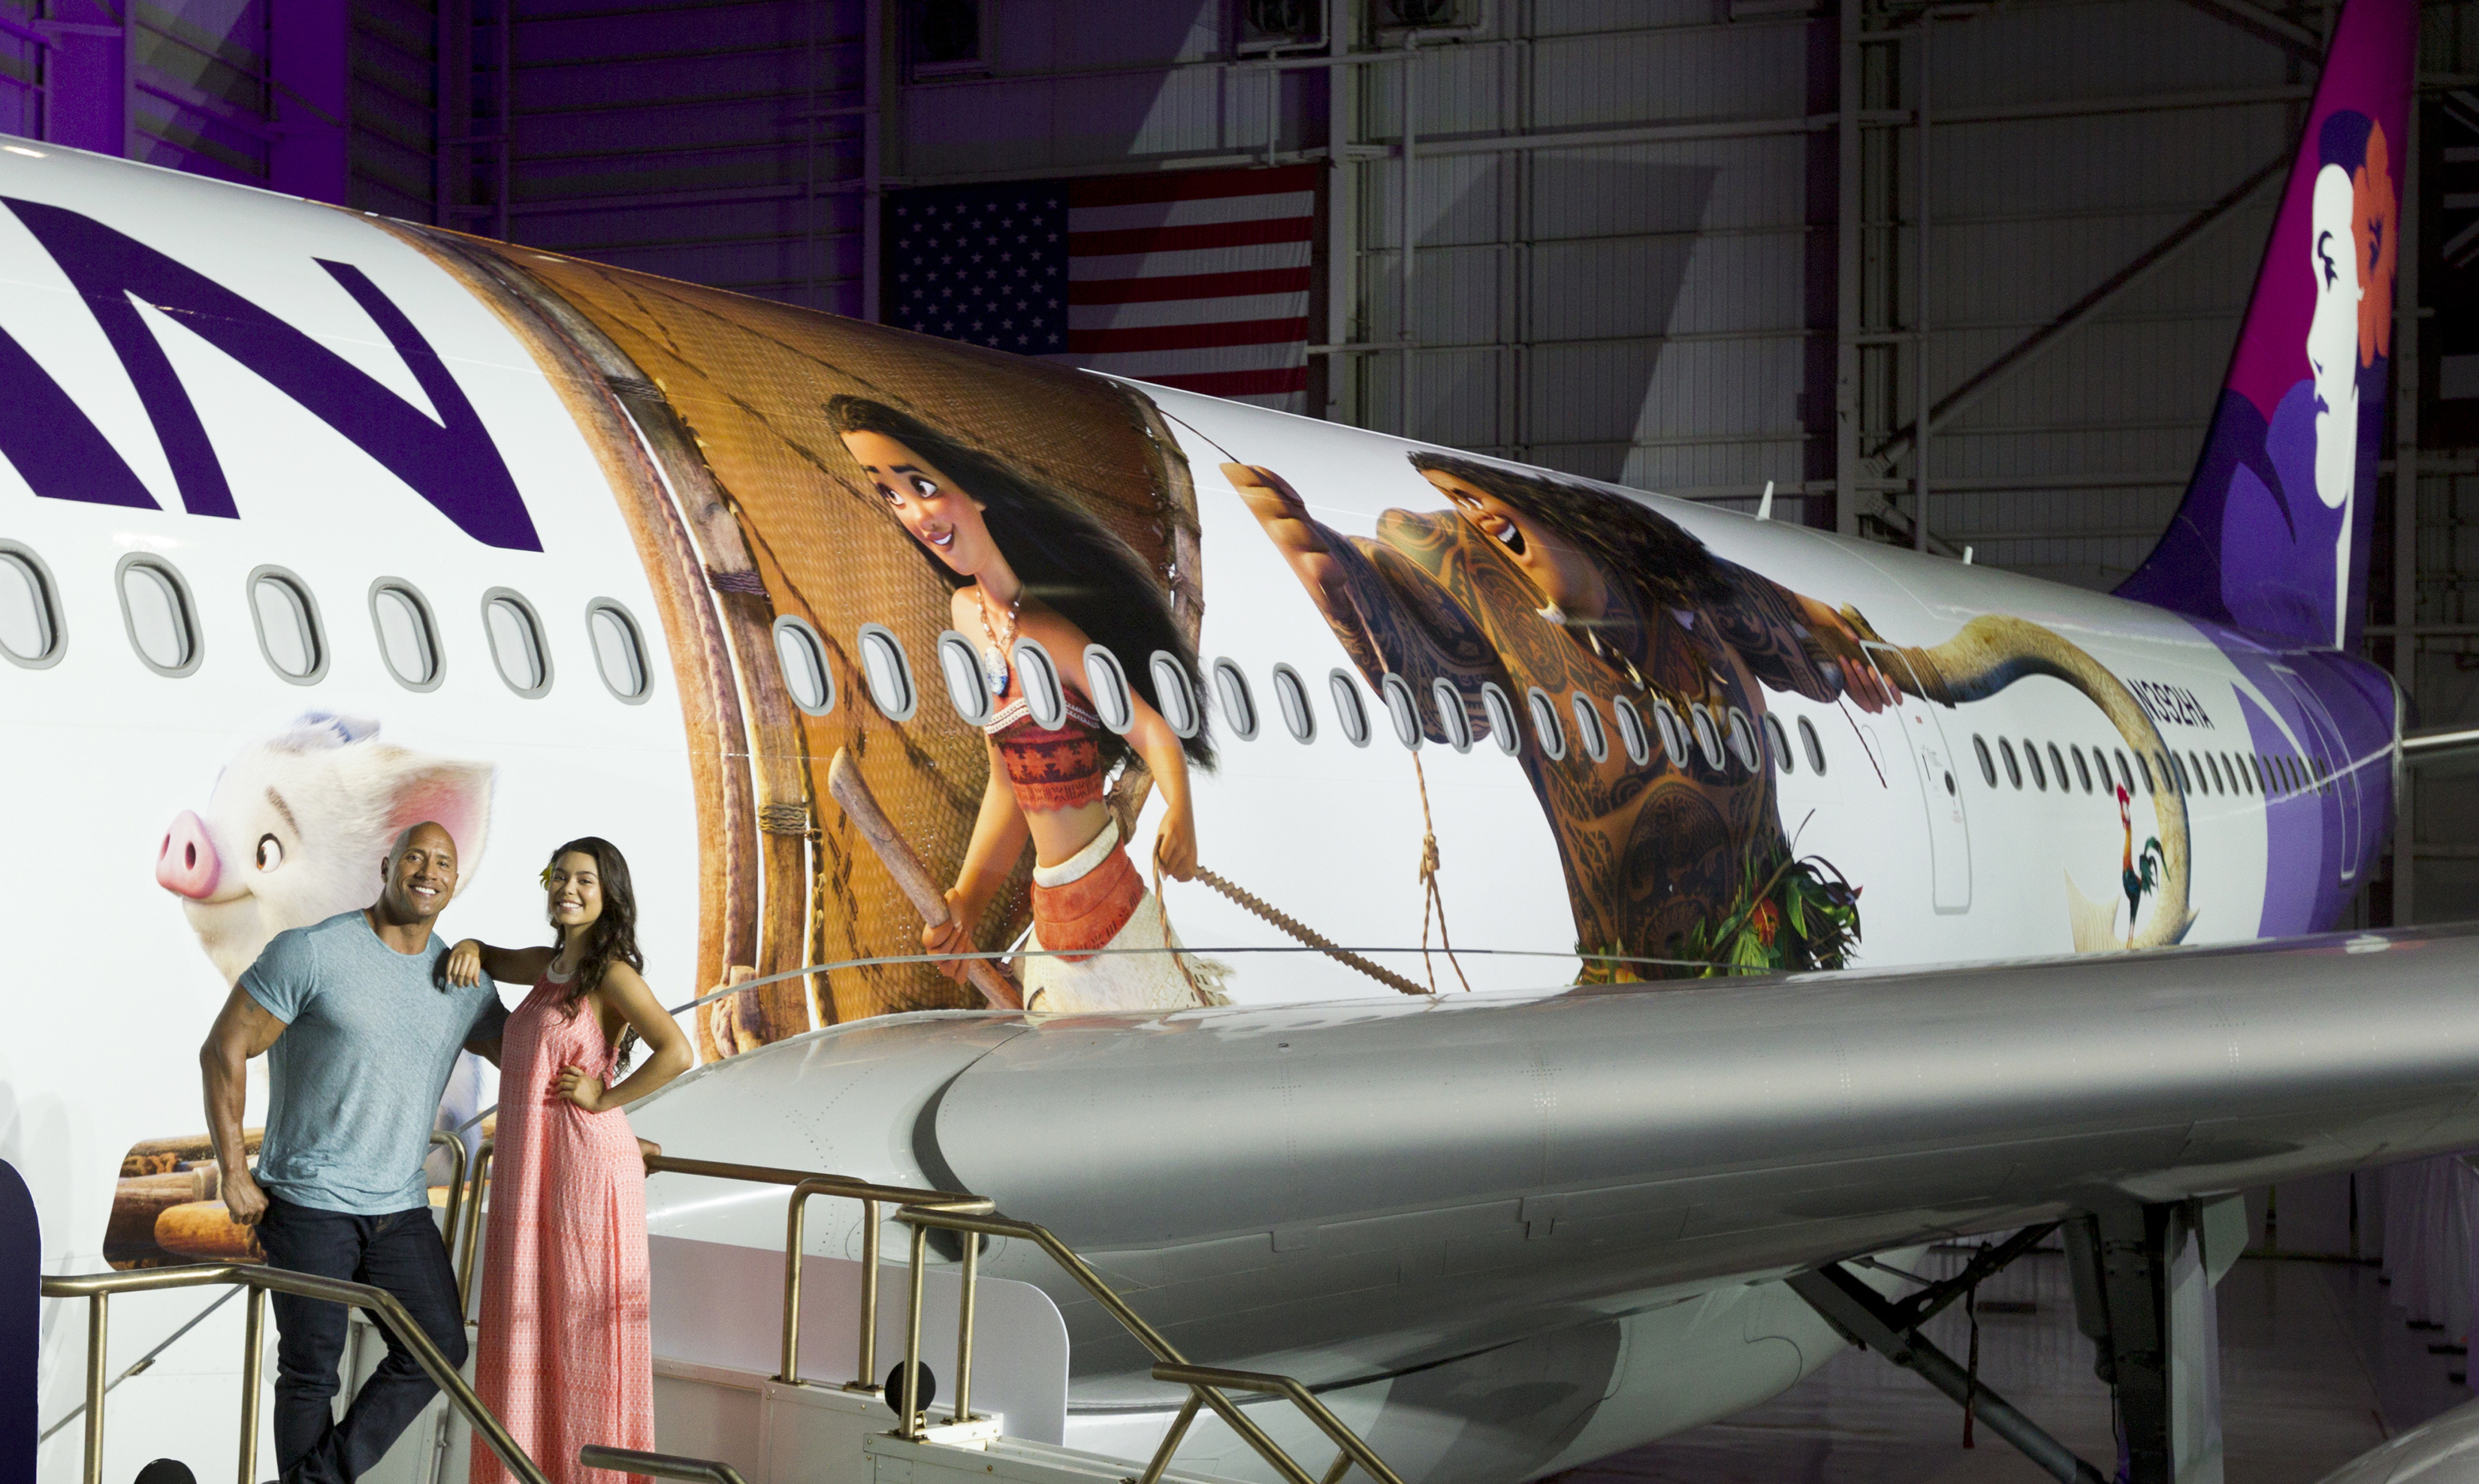 Hawaiian Airlines today revealed the first of three Moana-themed planes at its home base at Honolulu International Airport (HNL). Aulii Cravalho, the Hawai?i-born actress who is the voice of Disneys Moana, and Dwayne Johnson, the voice of demigod Maui, were among the first to see the inspiring new design. Photo by Donald Traill for Hawaiian Airlines